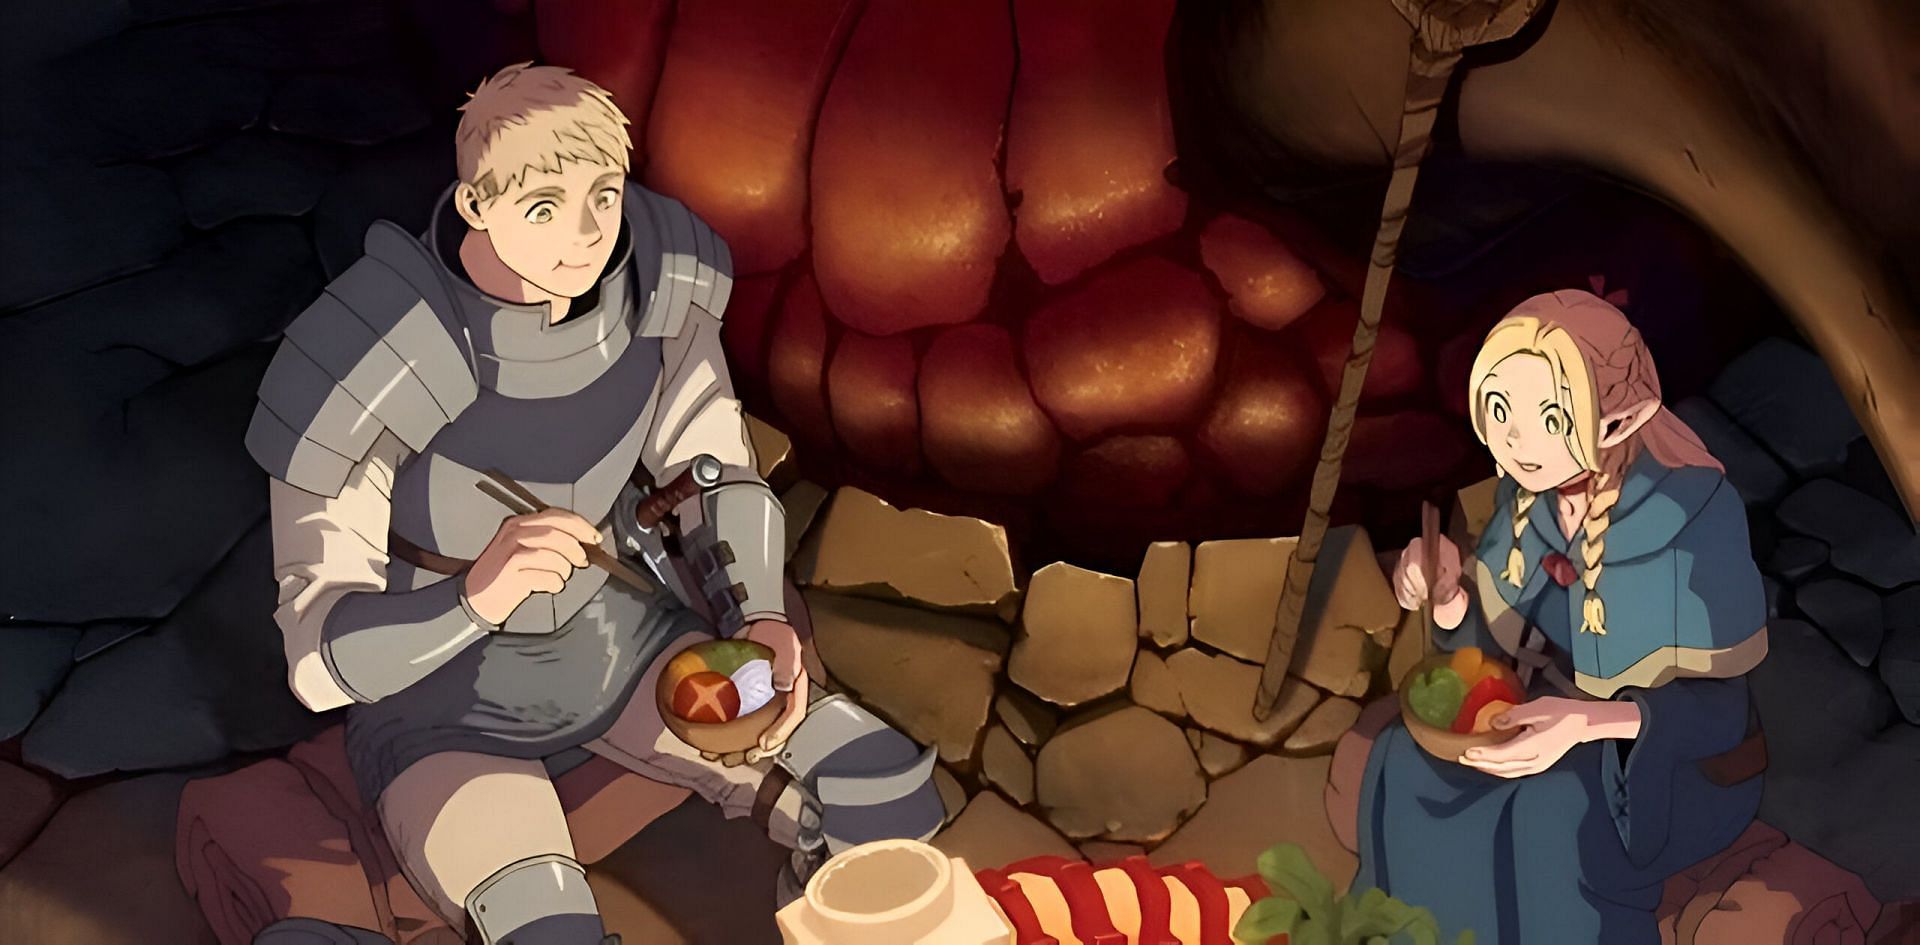 Laois (left) and Marcille (right) as seen in the anime (Image via TRIGGER)